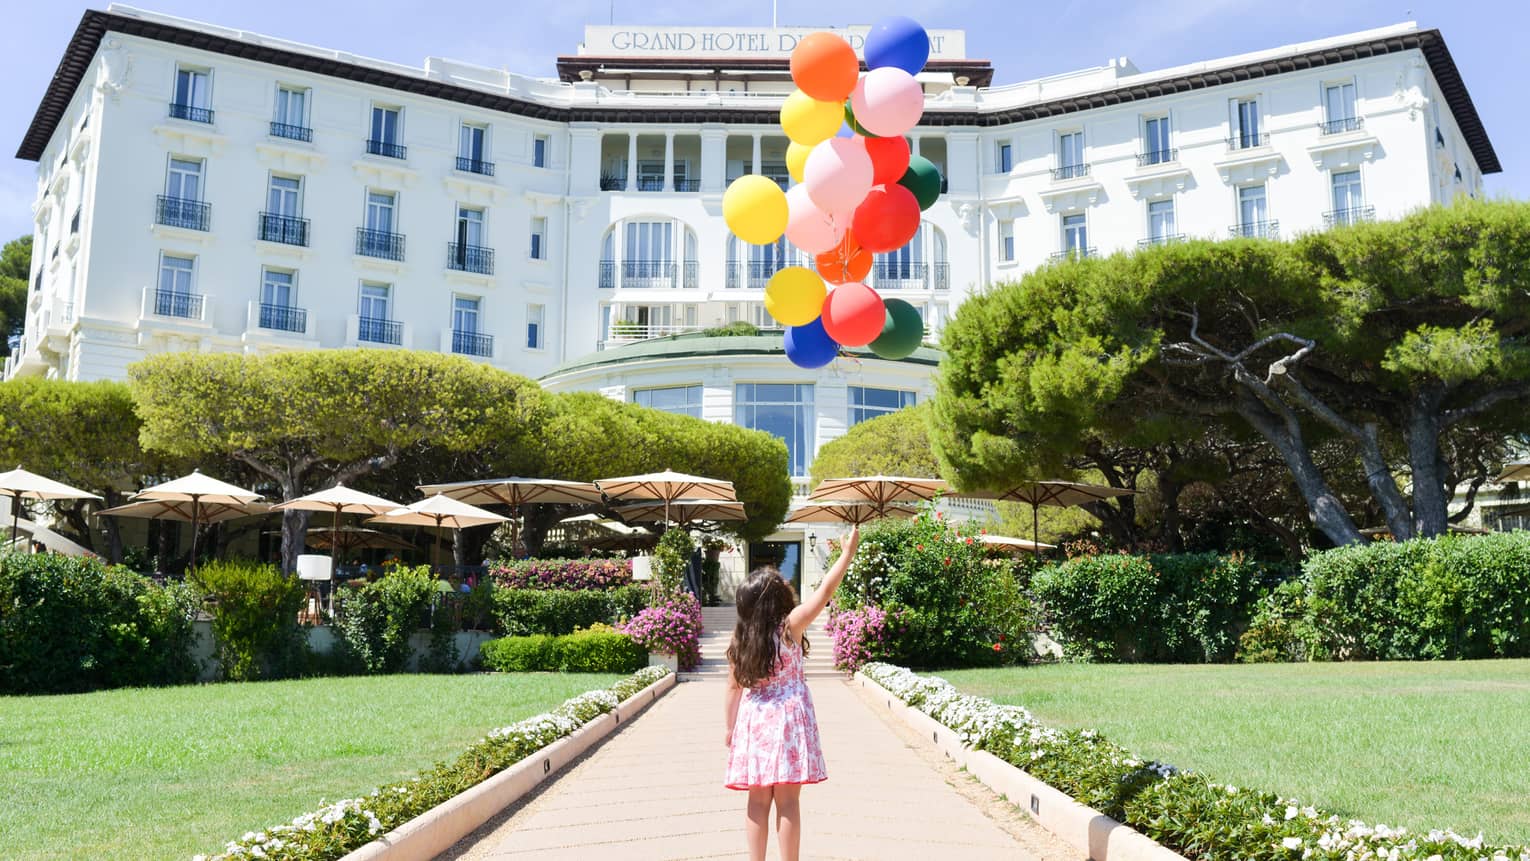 Young girl holds bunch of colourful balloons on brick path leading to hotel